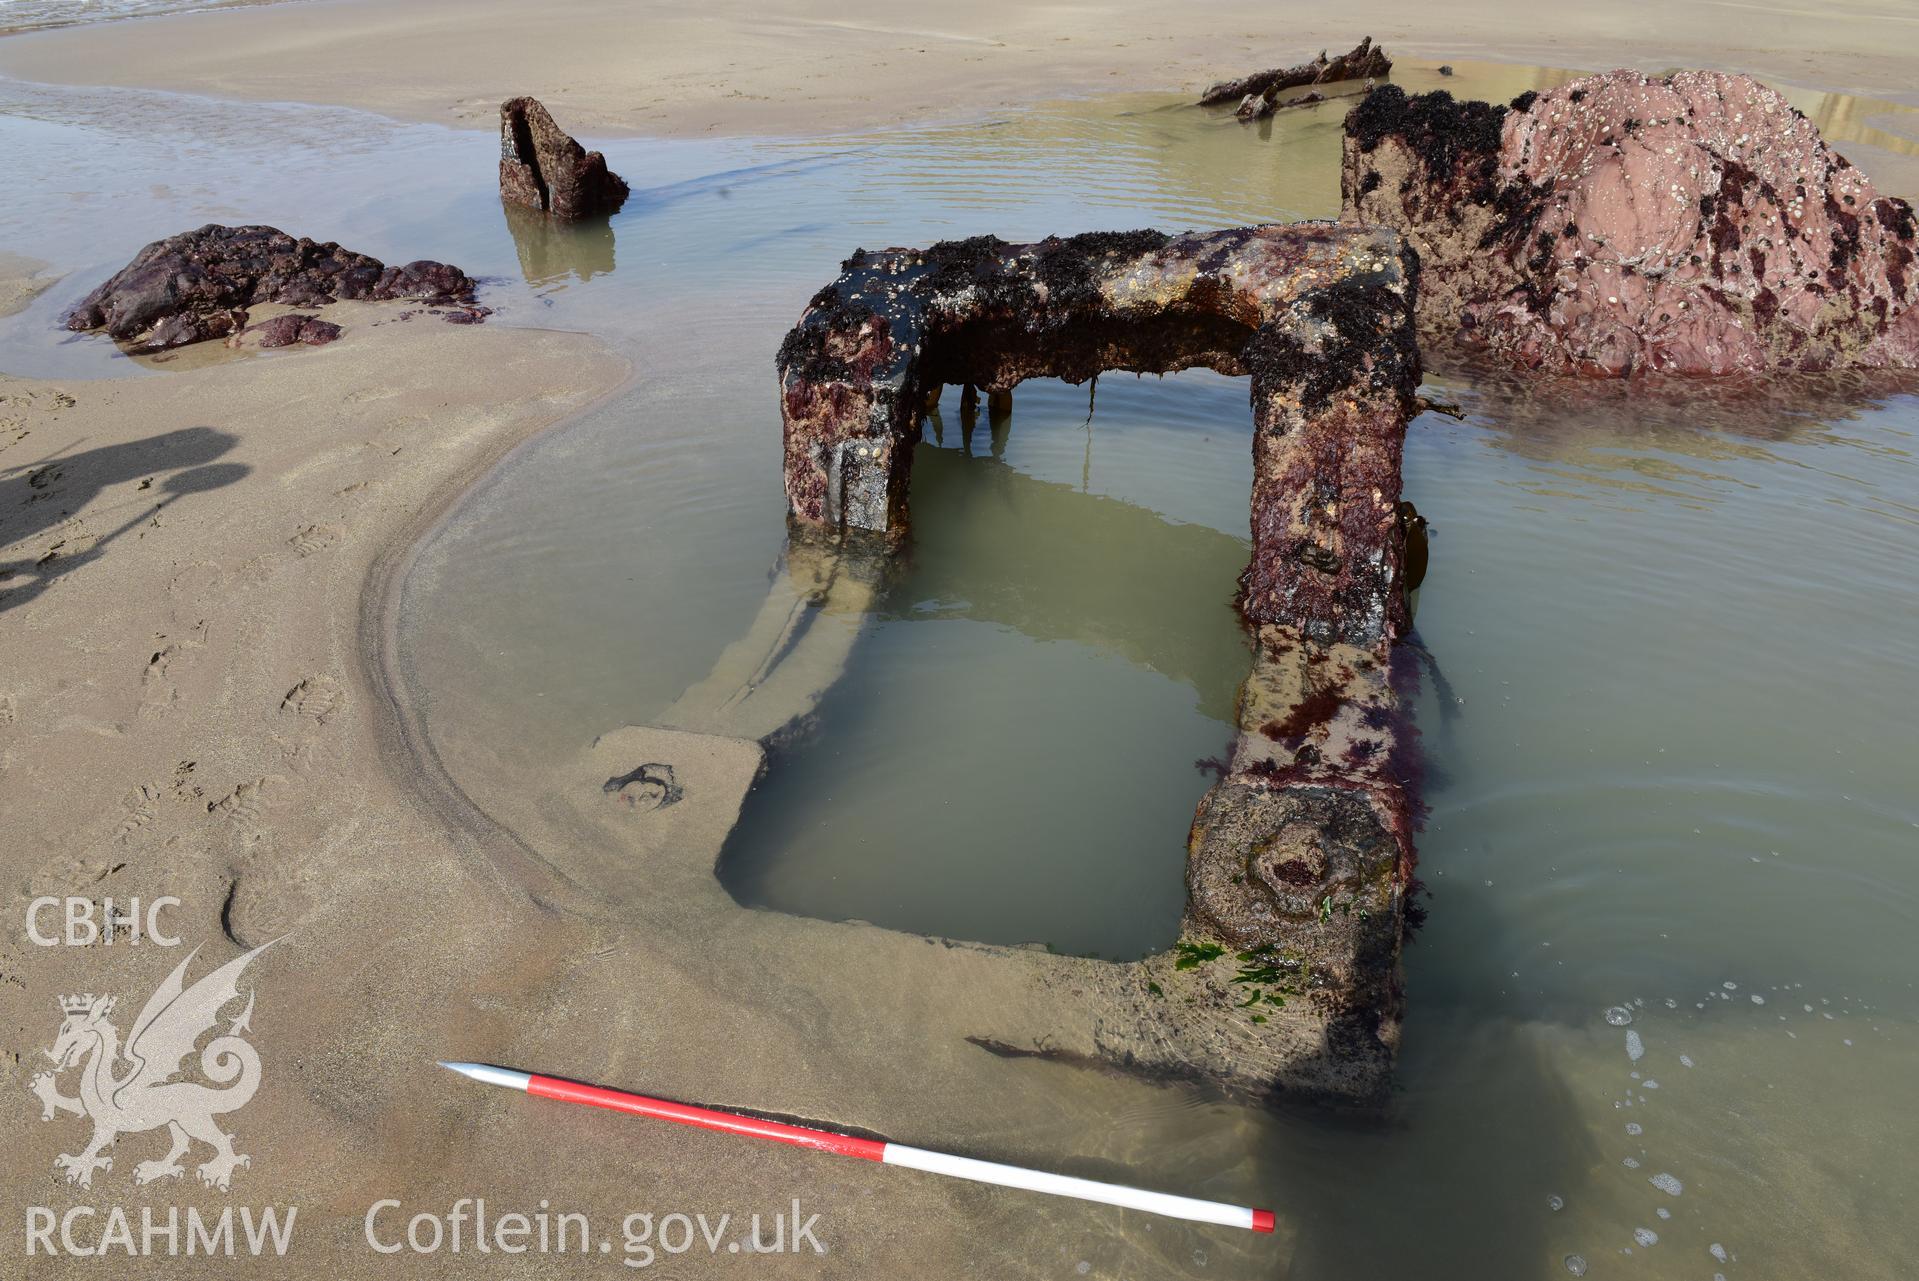 Parts of the wreck embedded in the sand with 1m scale. Taken by Toby Driver. Produced with EU funds through the Ireland Wales Co-operation Programme 2014-2023. All material made freely available through the Open Government Licence.